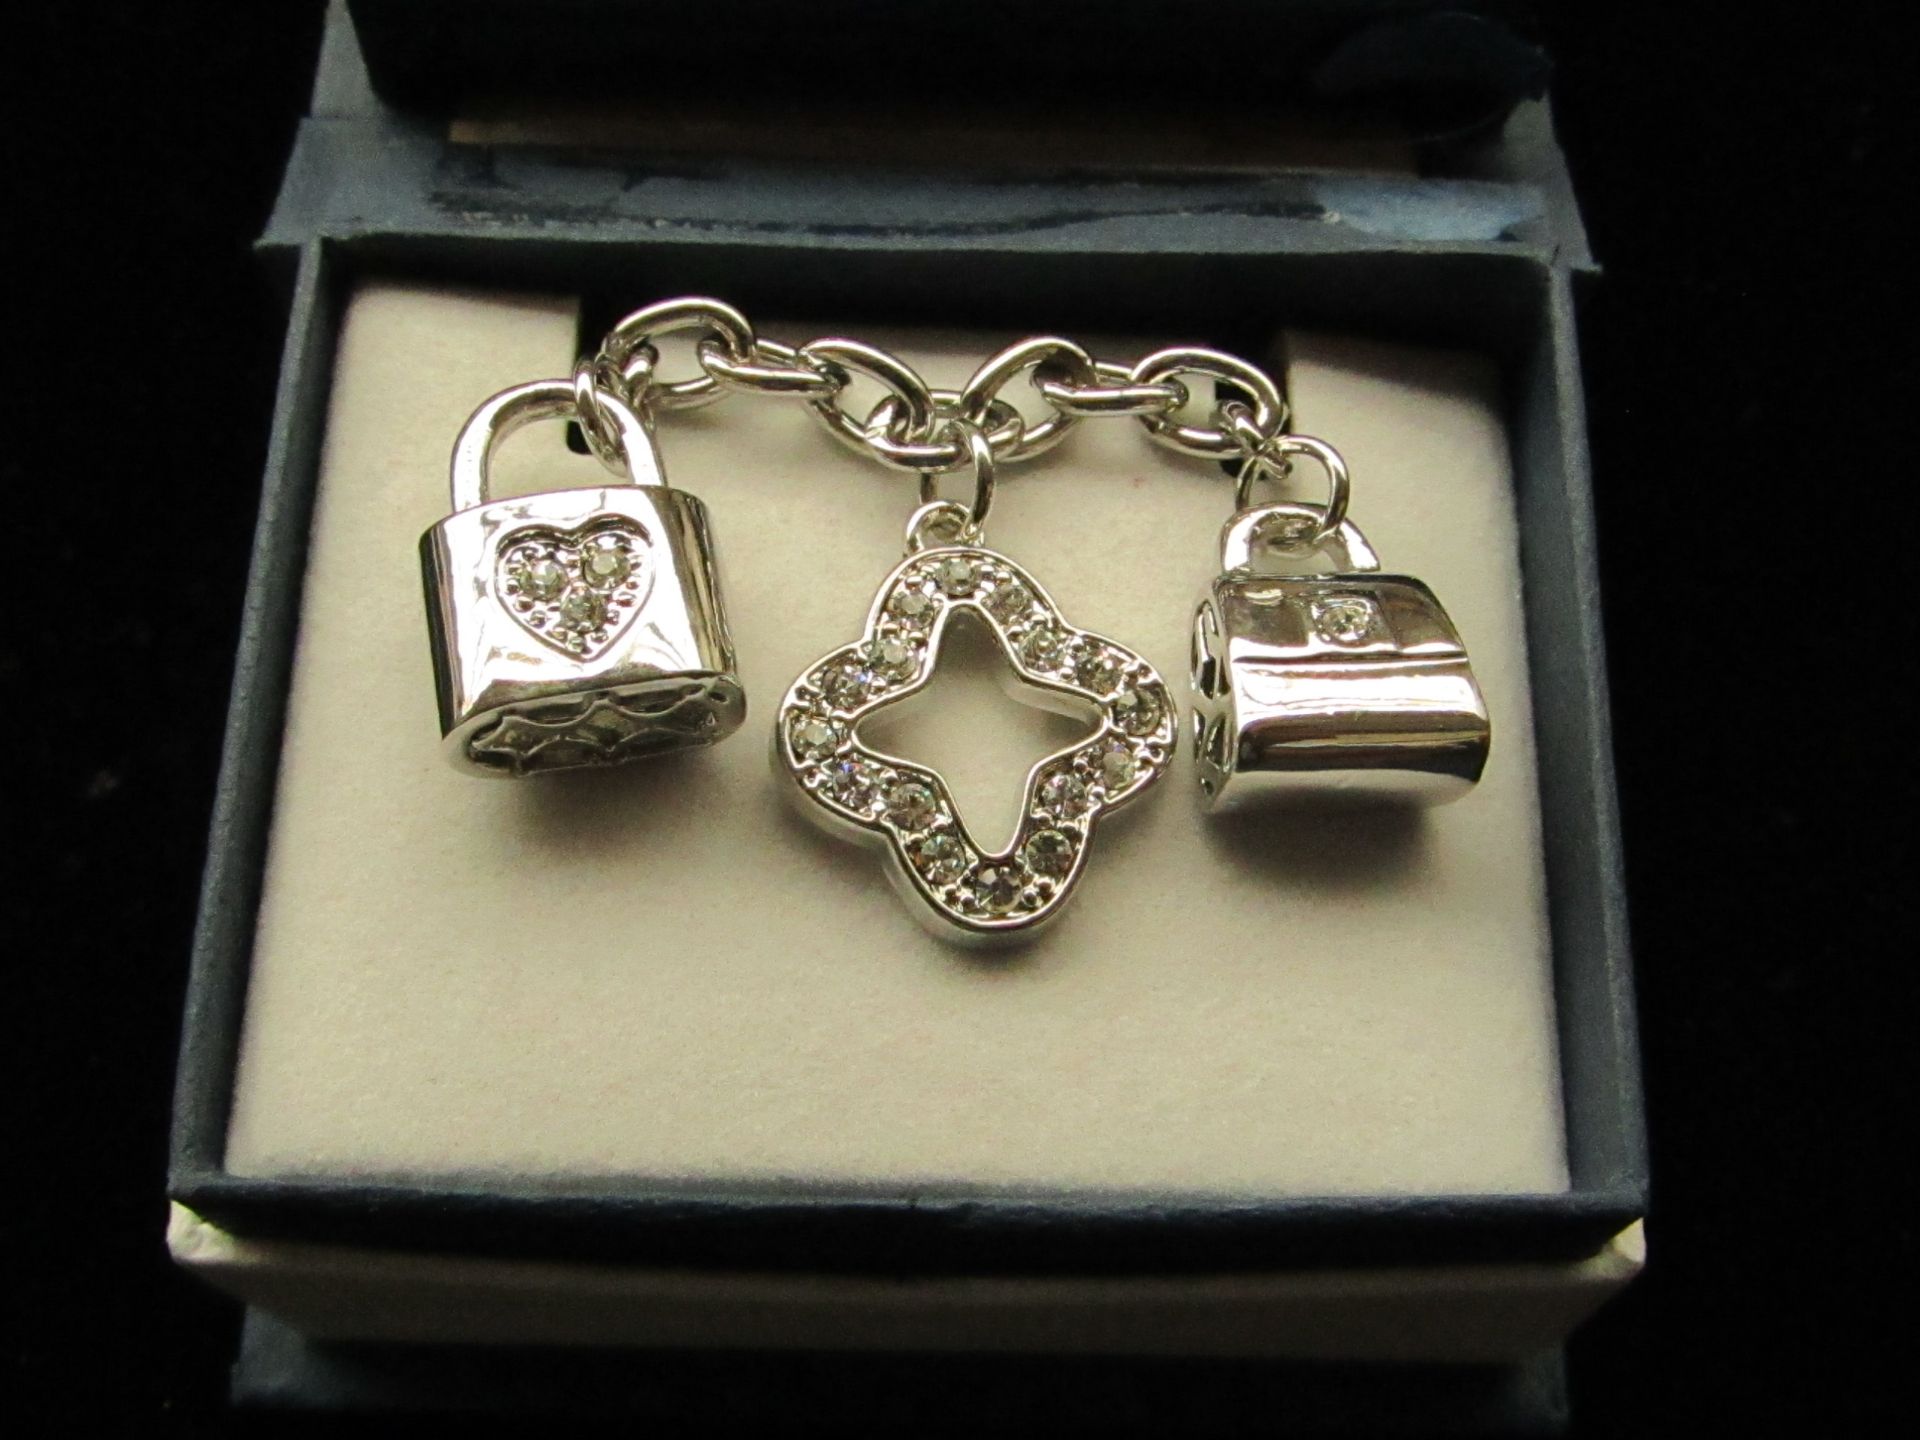 3x Carlo Charm bracelets each with 7 charms, new and boxed.